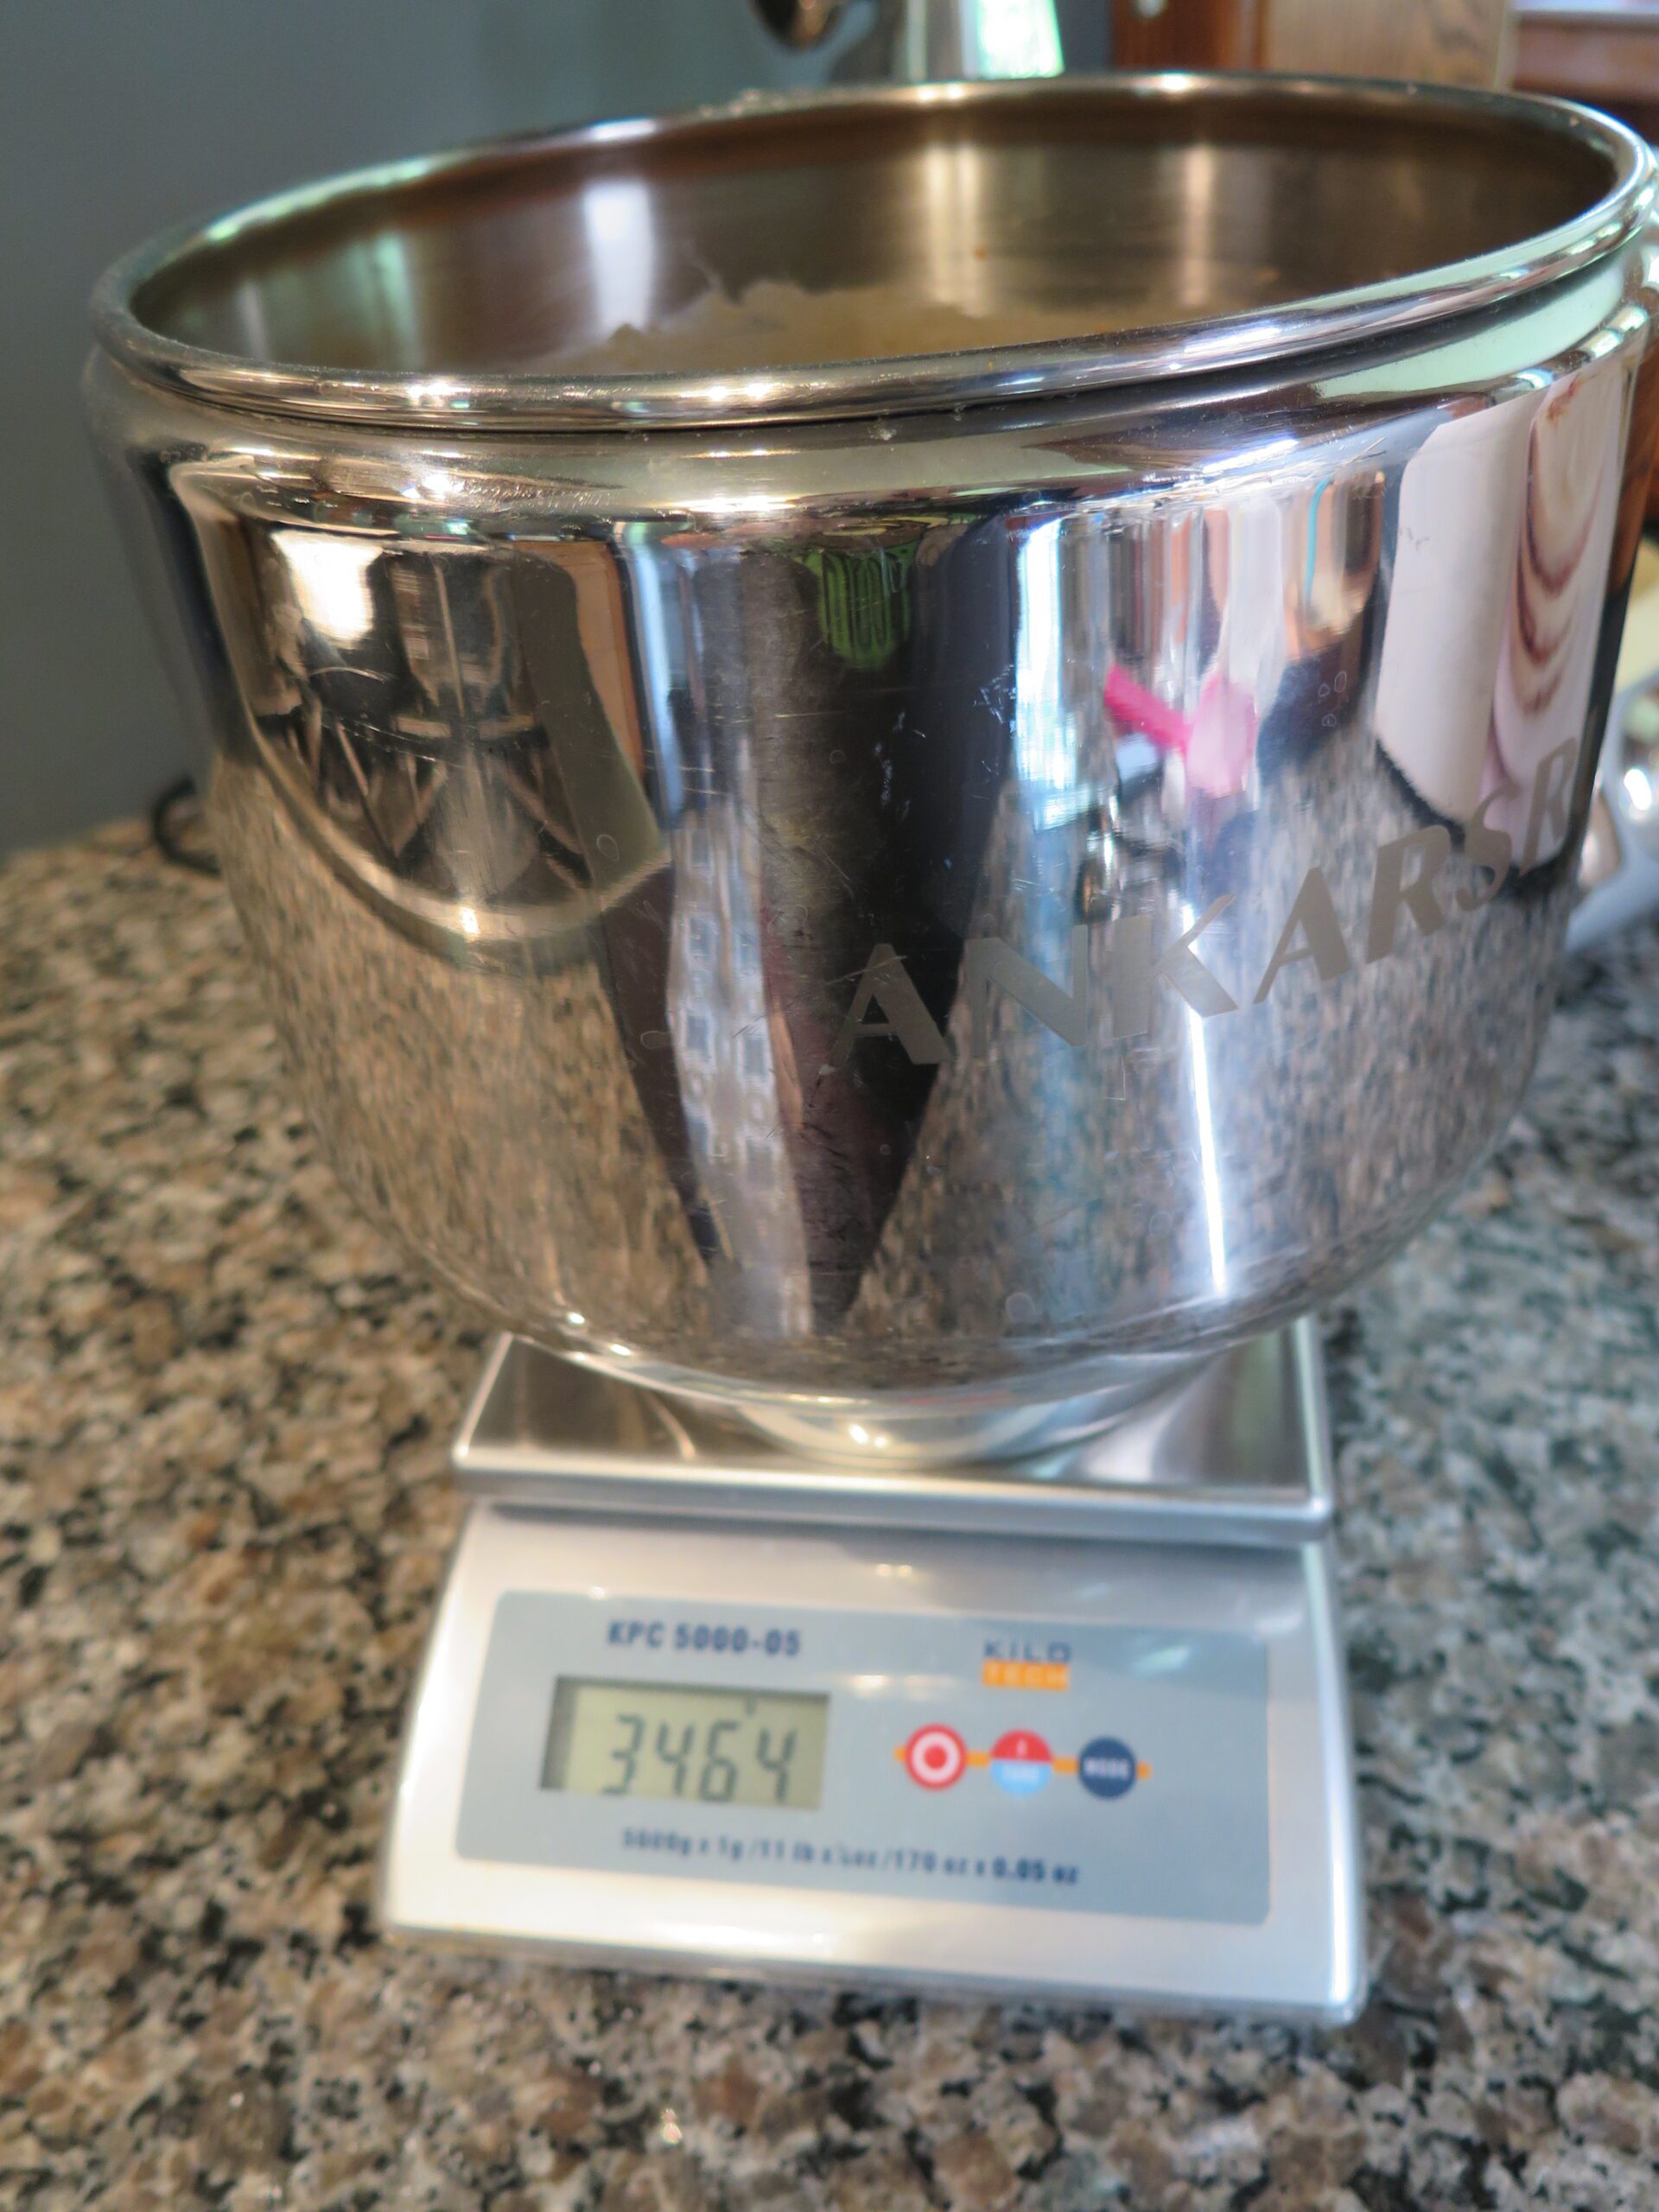 weighing the bowl with the carrot cake mixture